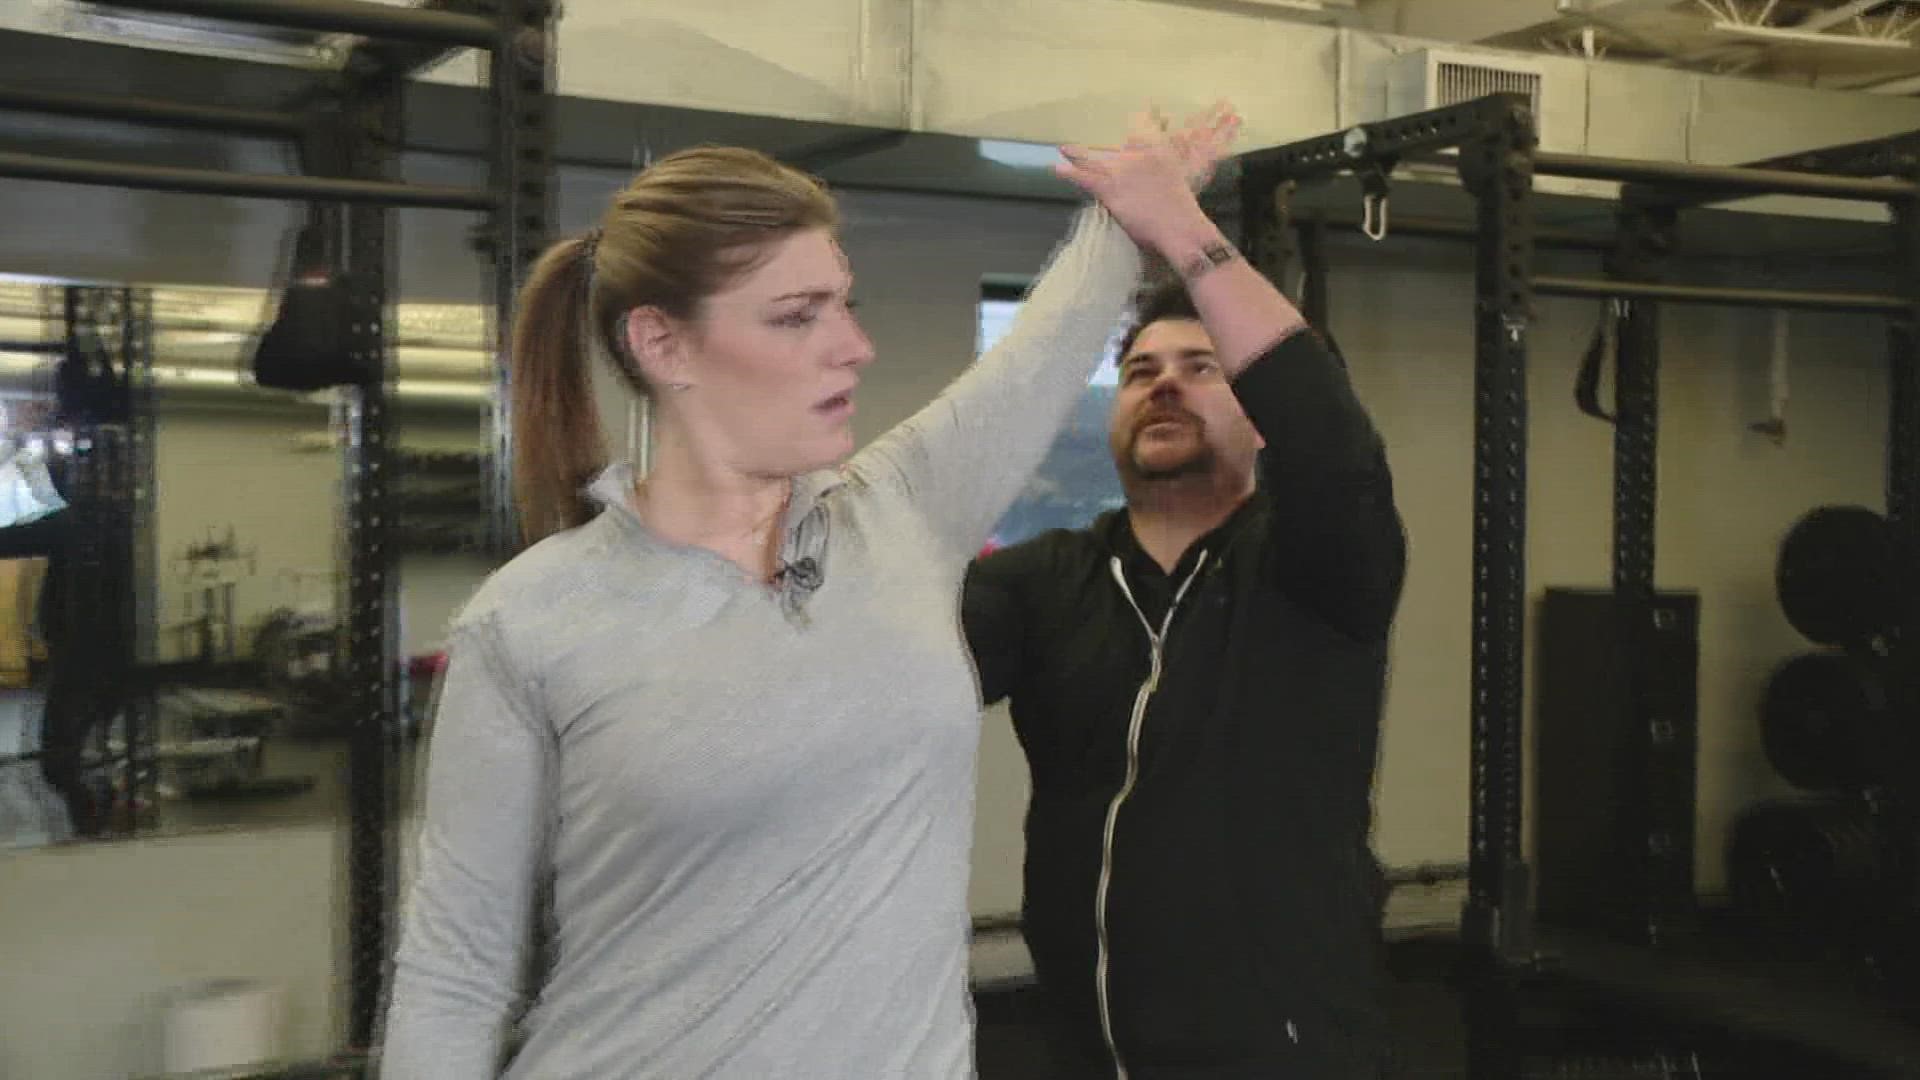 Craig Peugh from The Form Lab shows us stretches you can do at home to help with your workouts.